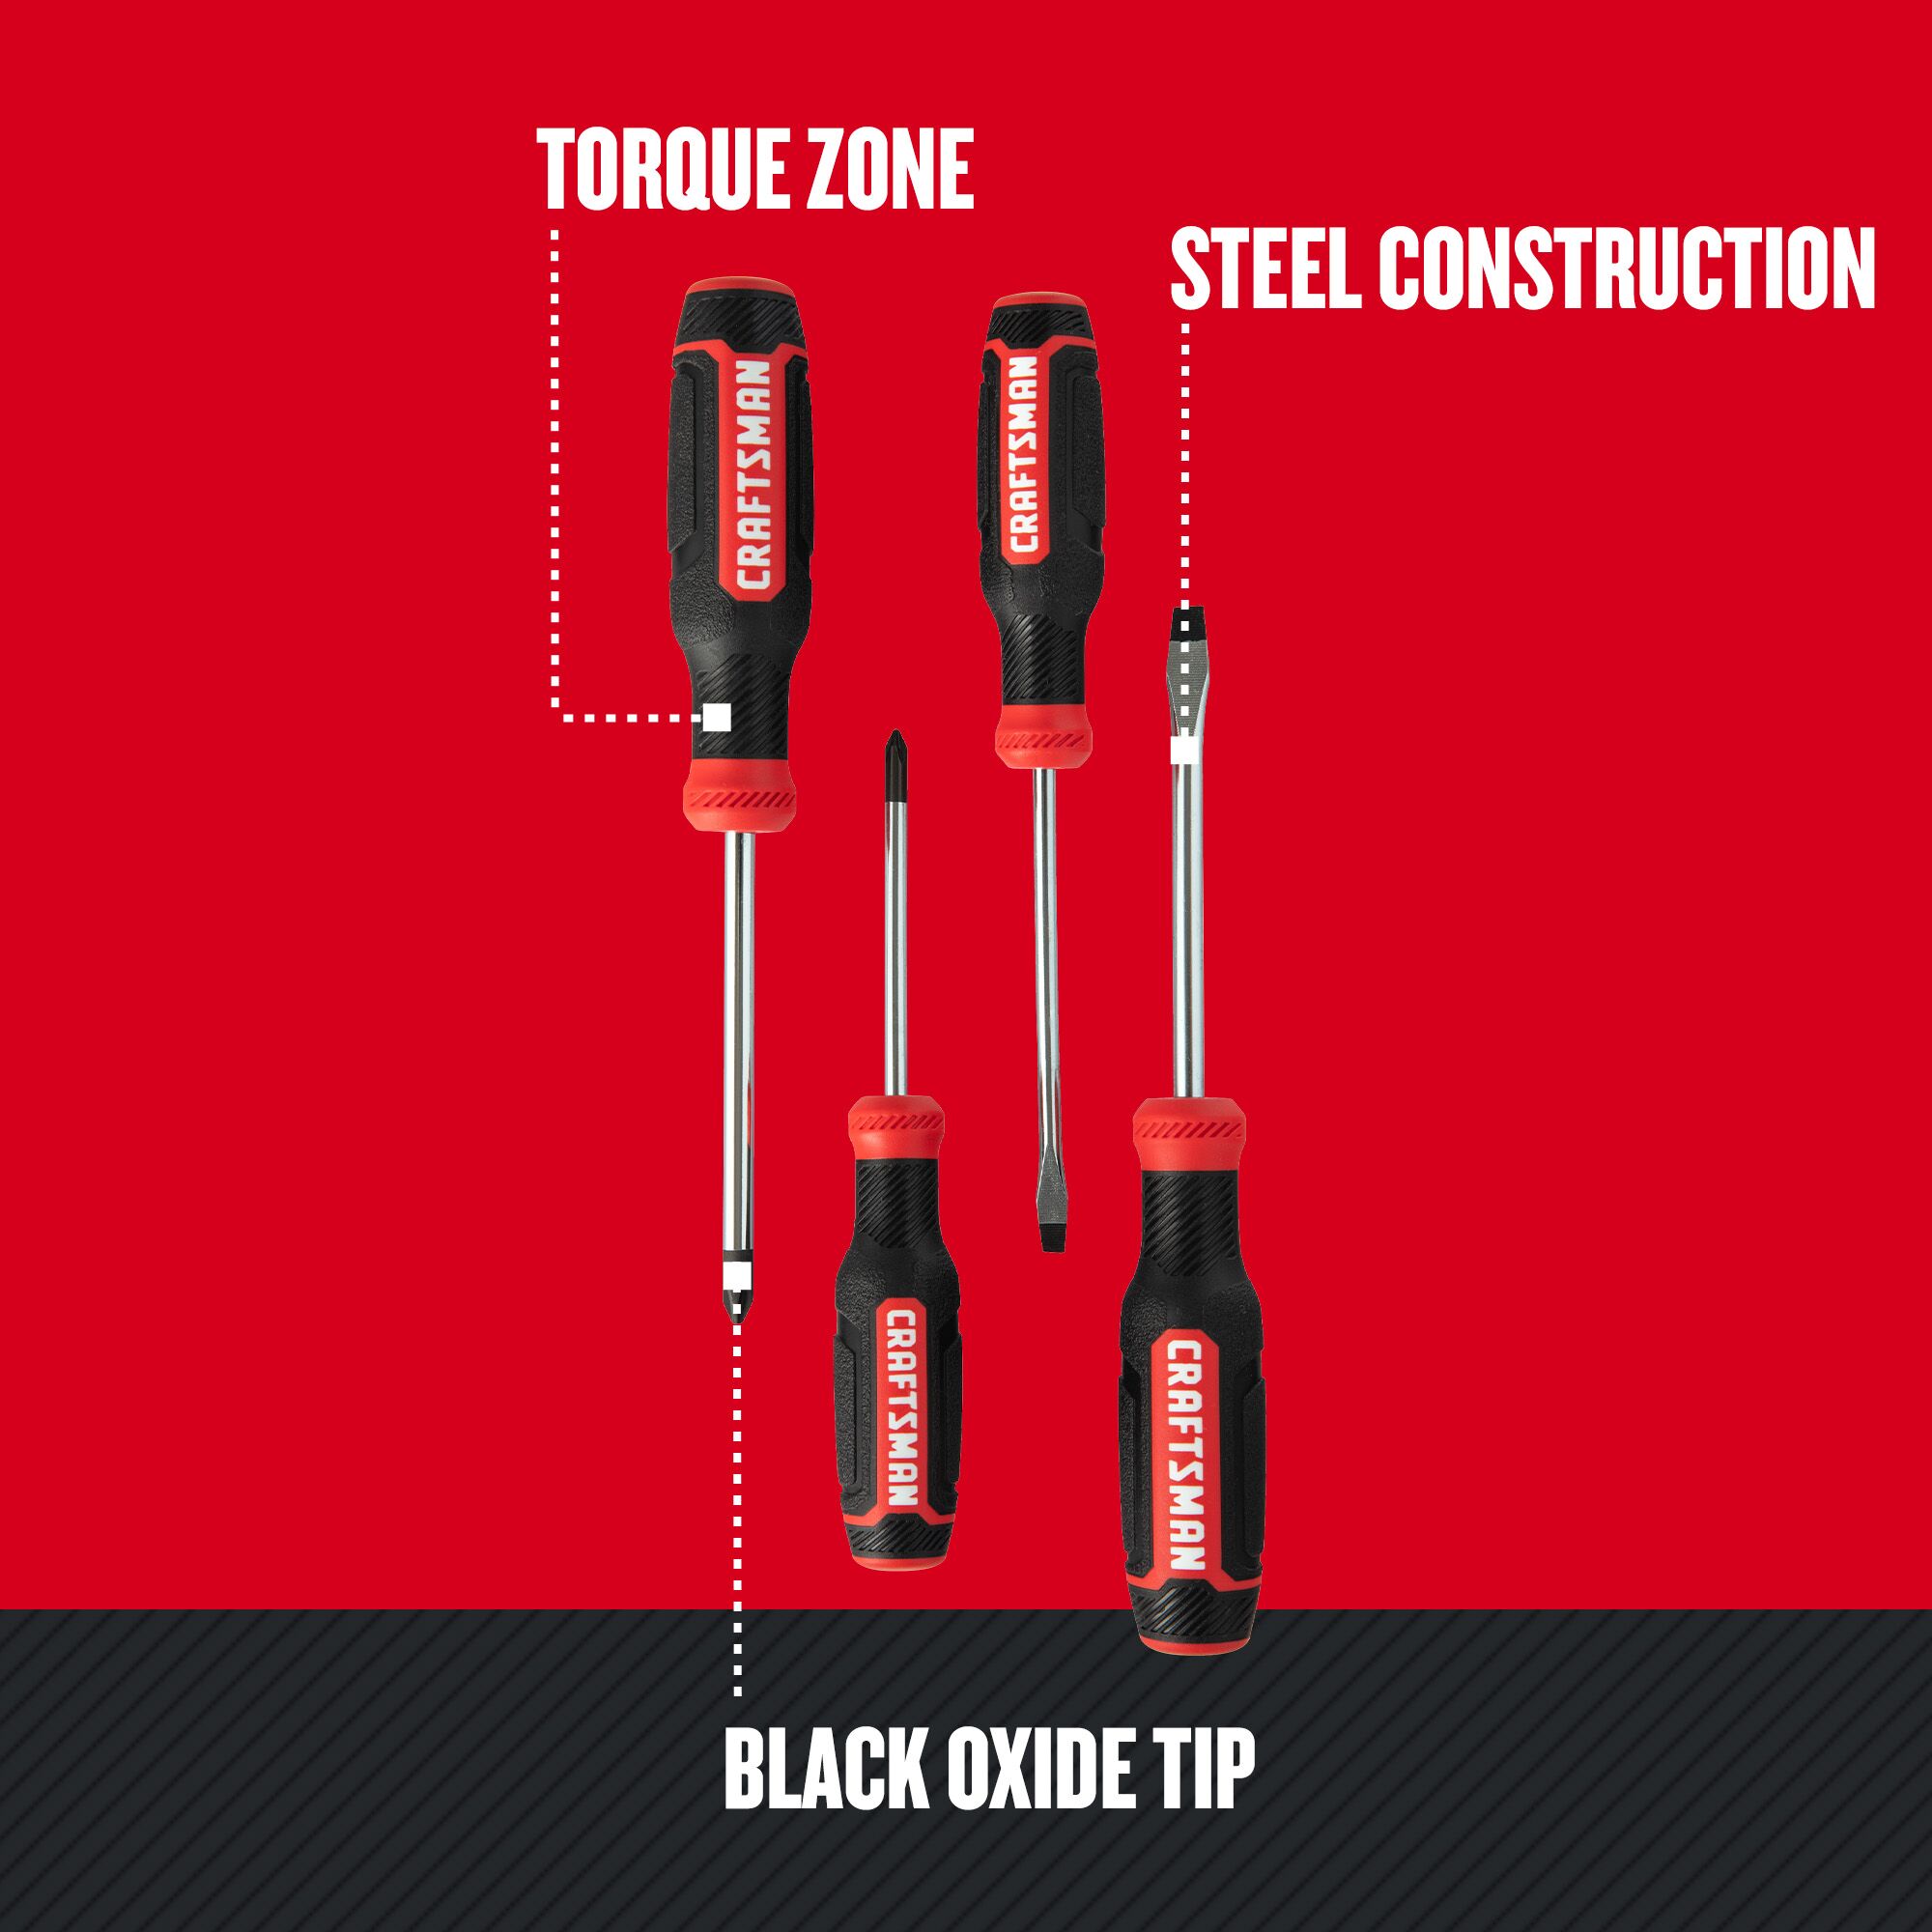 Graphic of CRAFTSMAN Screwdrivers: Bi-Material highlighting product features